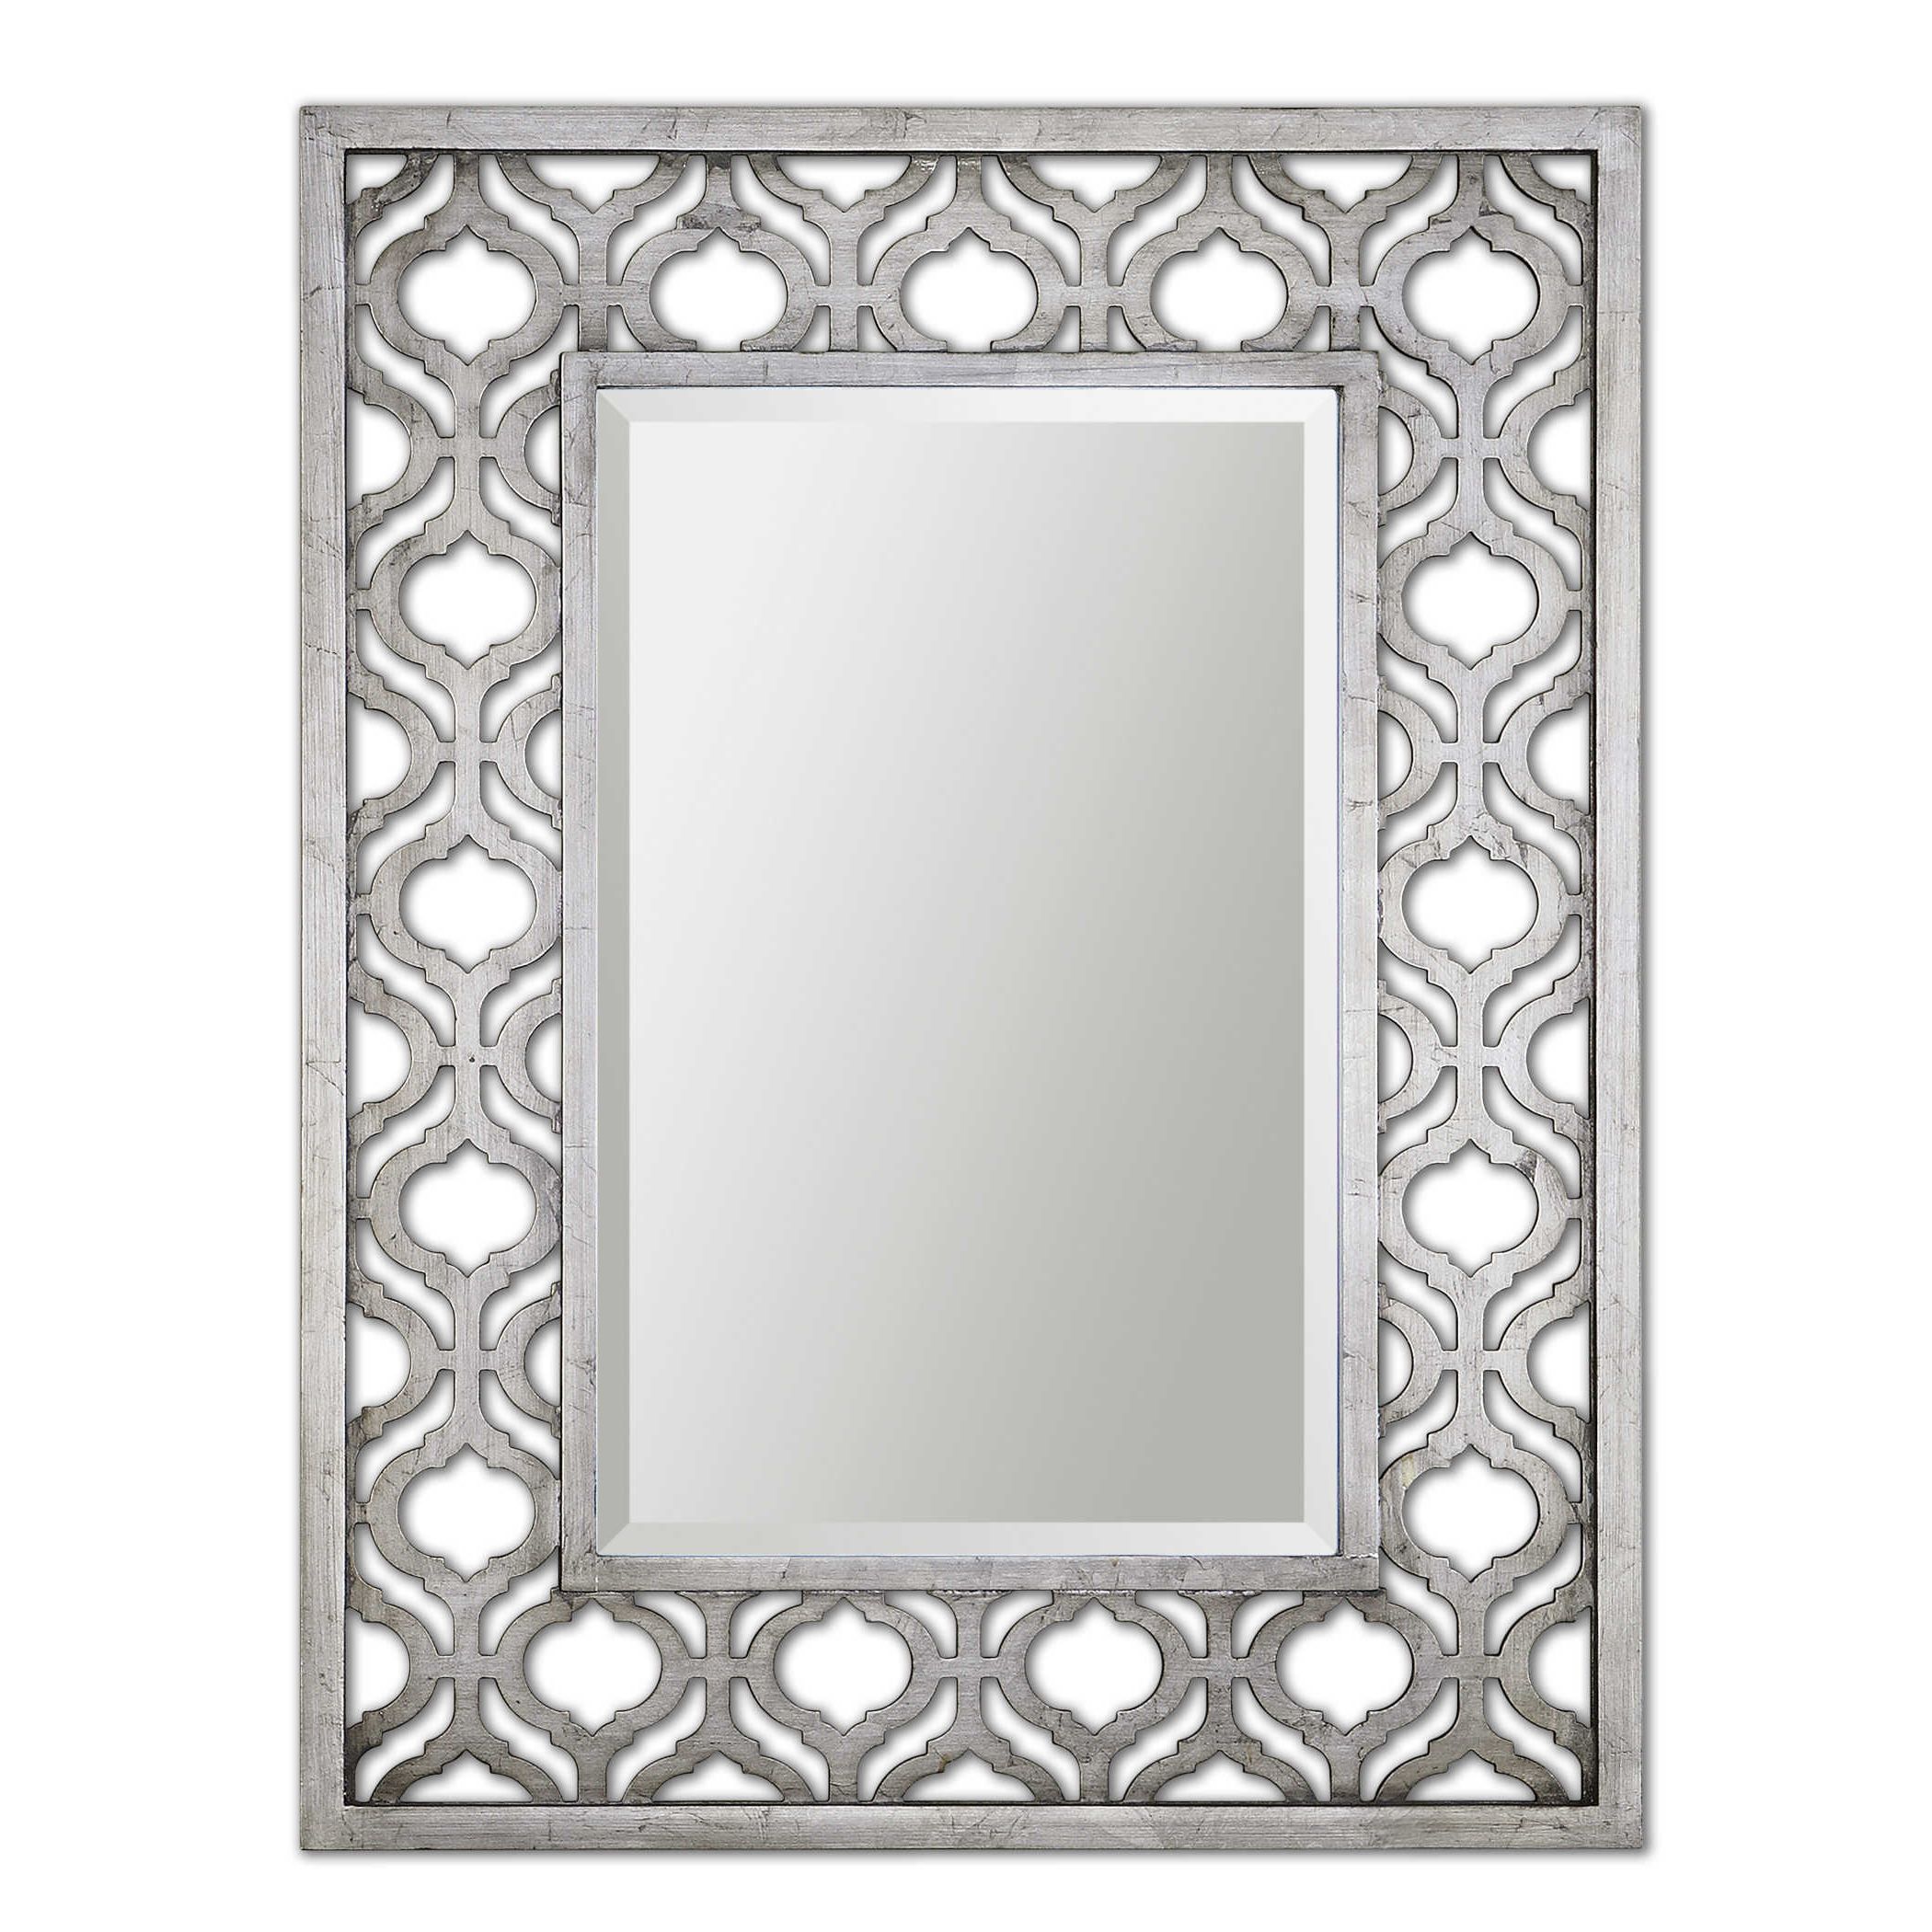 2020 Decorative Antiqued Silver Leaf With Black Wall Mirror Large 40" Vanity Within Silver Decorative Wall Mirrors (View 3 of 15)